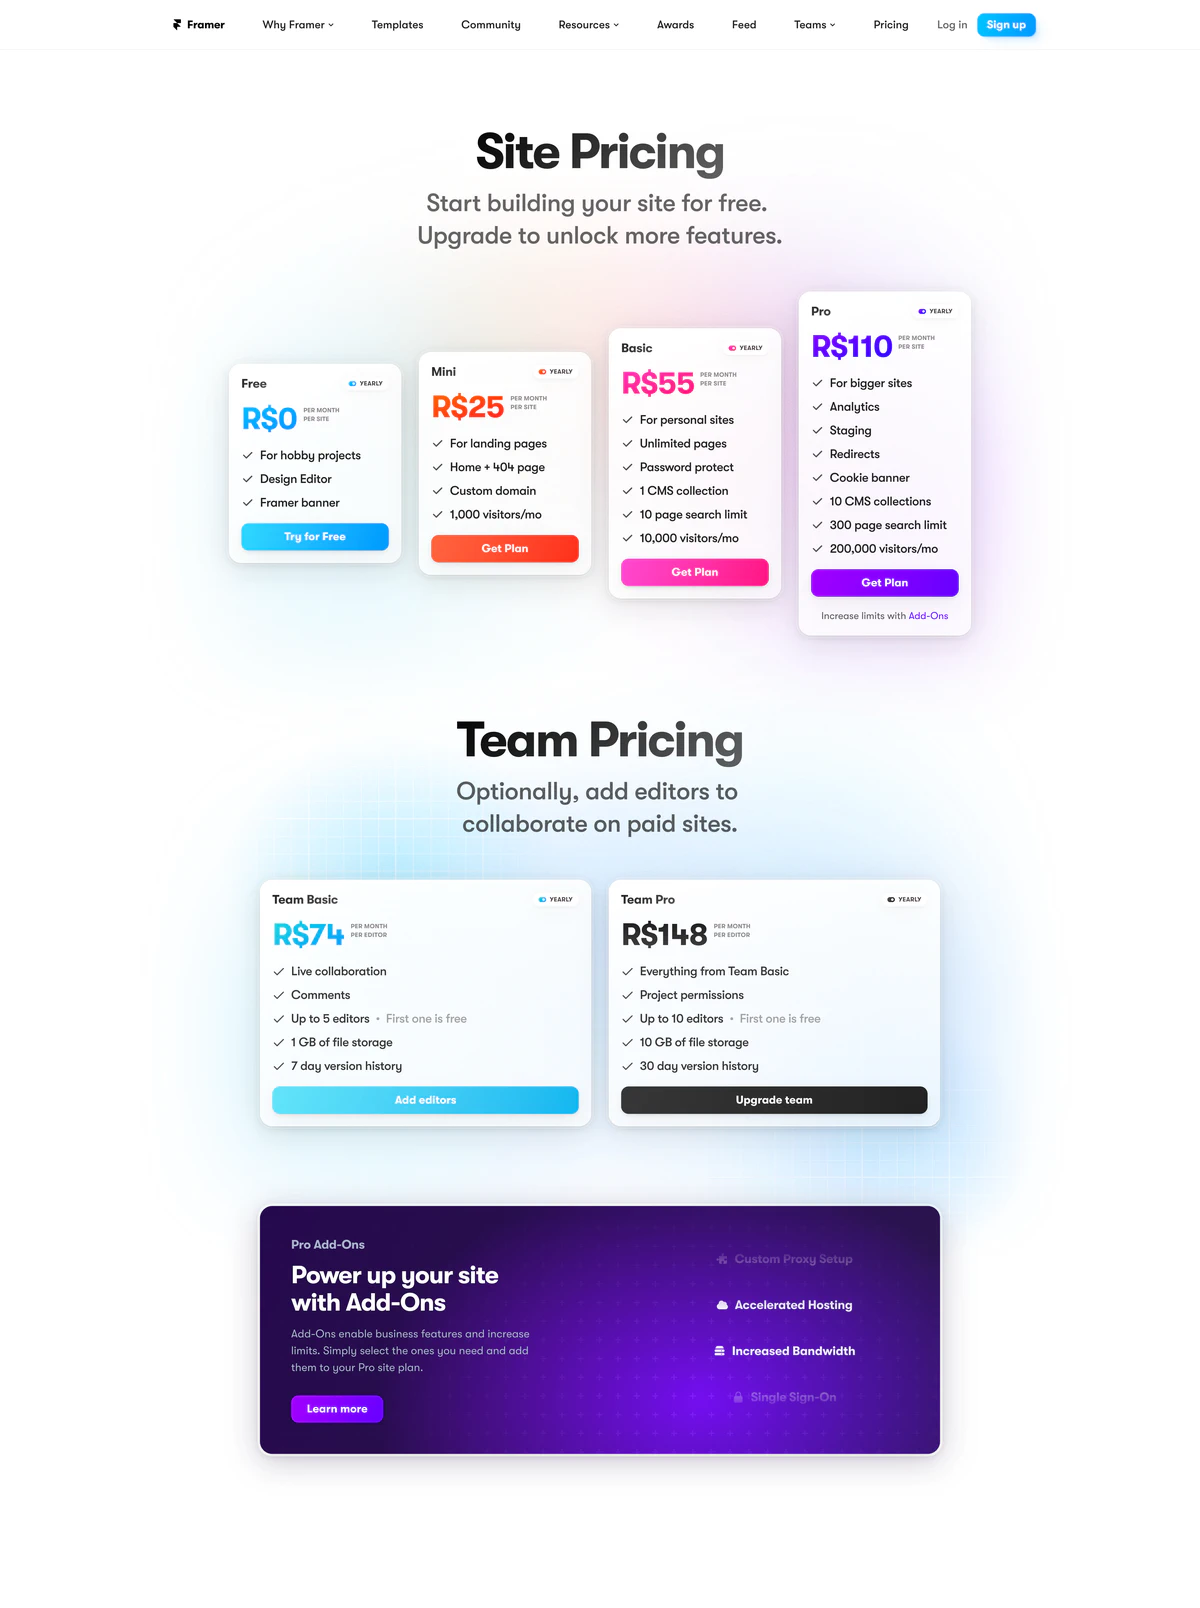 Pricing Page Example Framer